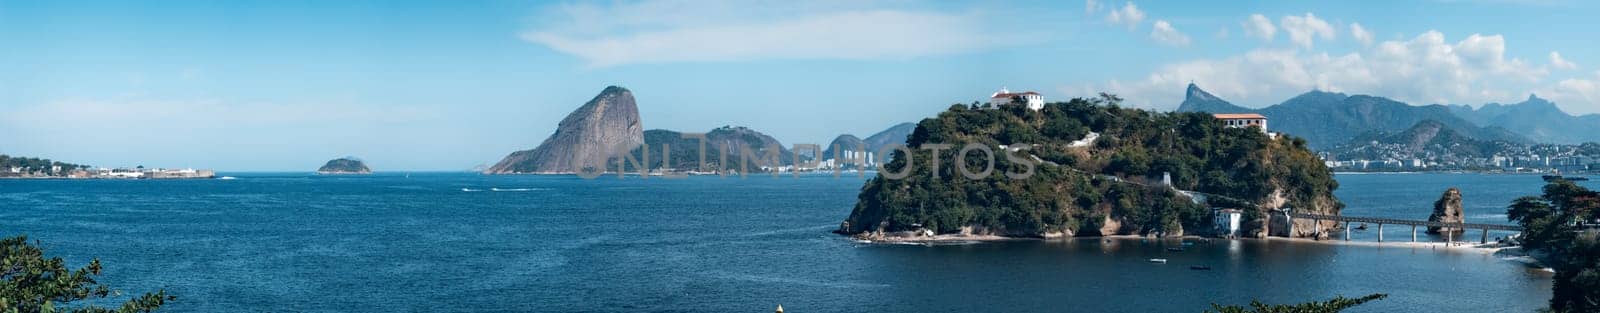 Panoramic View of Tropical Coastline with Iconic Mountains by FerradalFCG